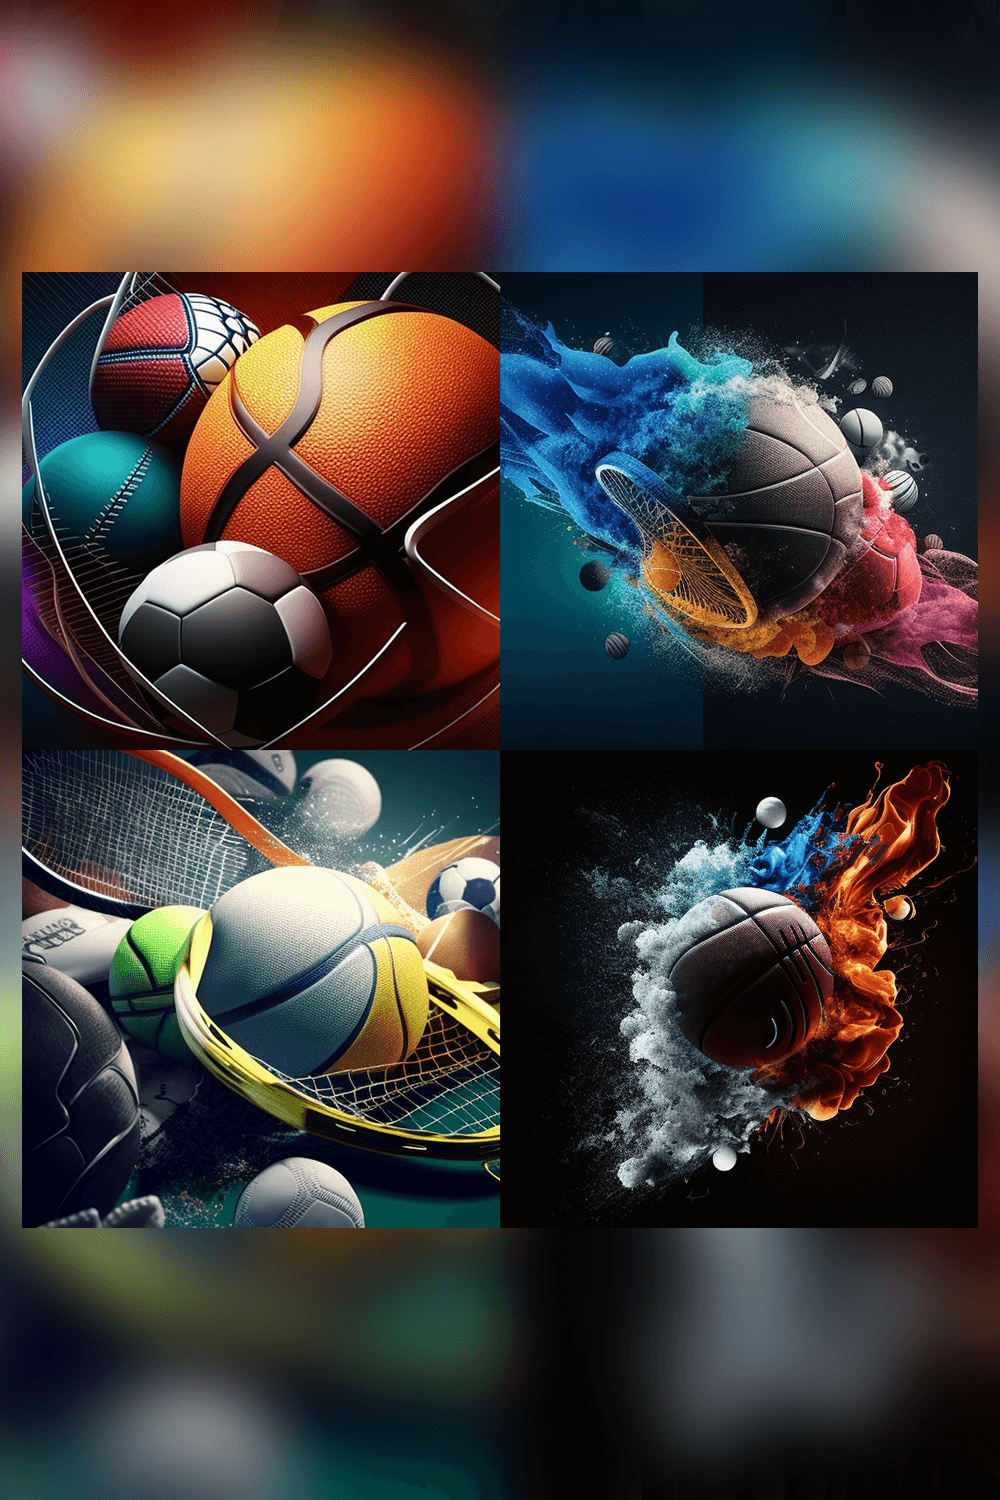 Series of photoshopped images of different sports items.